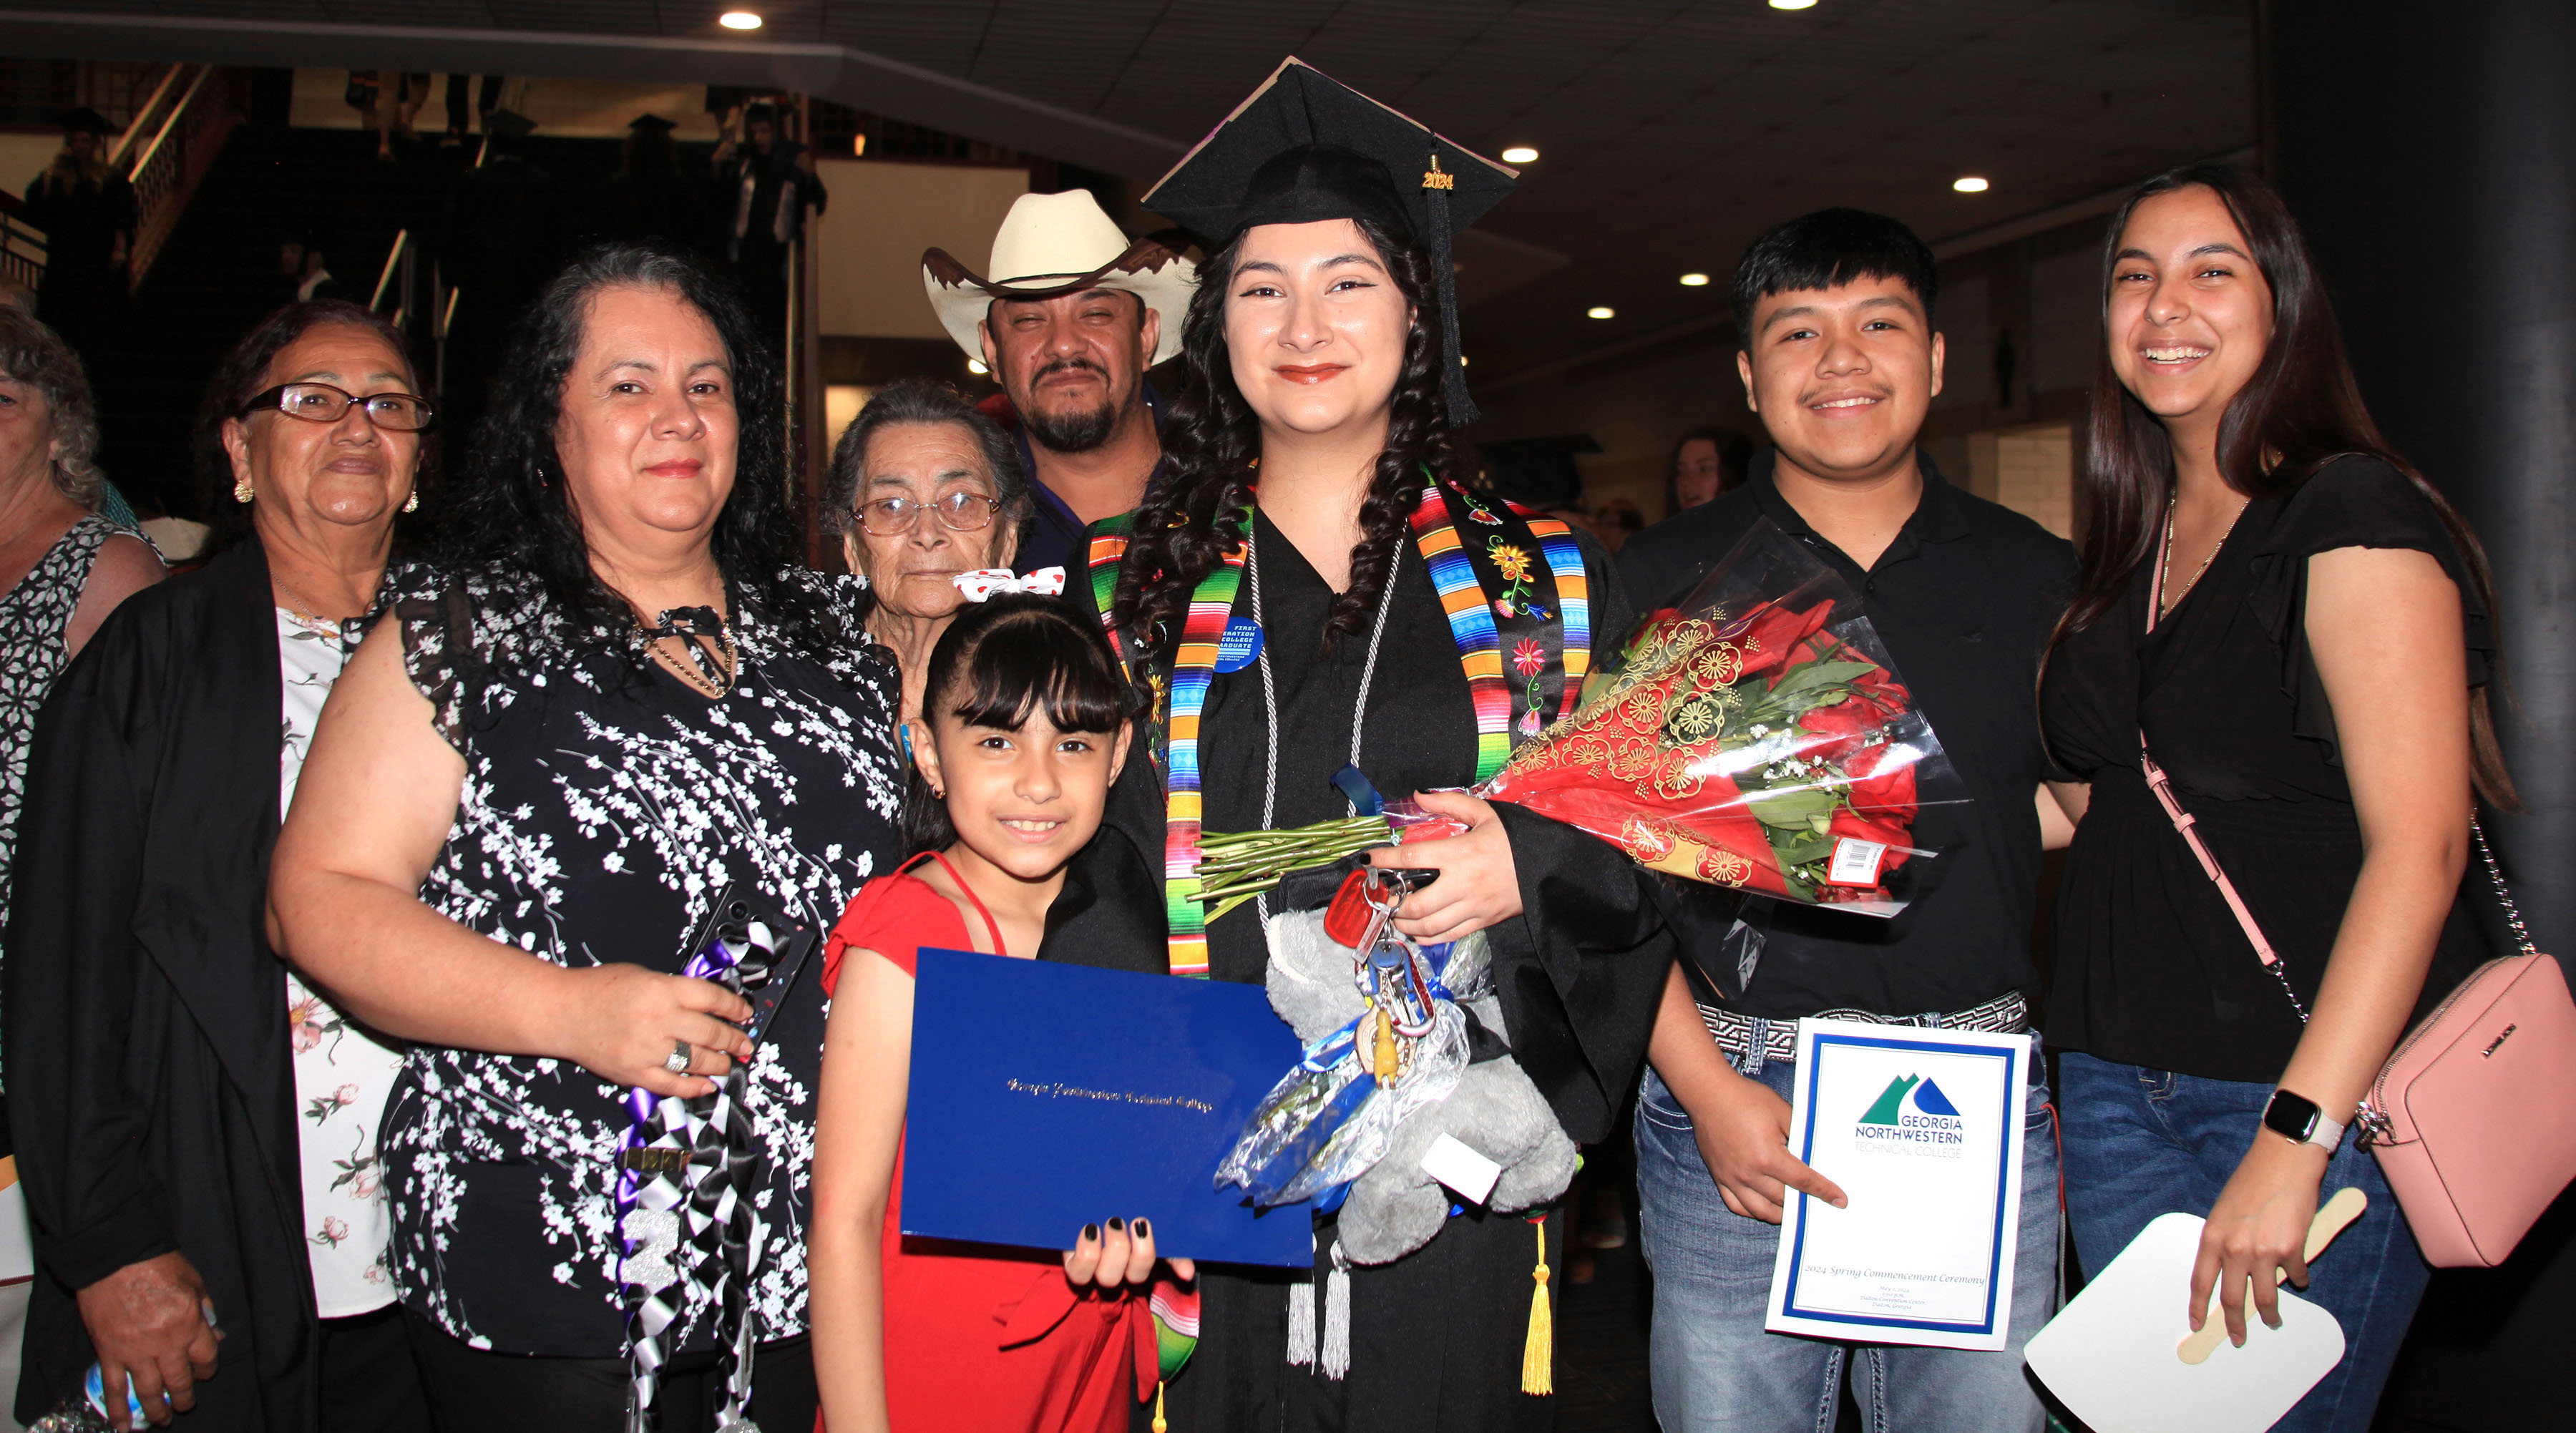 Graduate Yosdel Lizbeth Castaneda’s family celebrates with her. (From left, front) Carmela Martinez, Norma Martinez, Brizeyba Castaneda, Yosdel Lizbeth Castaneda, Johan Rodriguez, Daphne Castaneda, (back) Agricola Hinojosa and Jorge Castaneda. Castaneda received a diploma in Welding and Joining Technology.